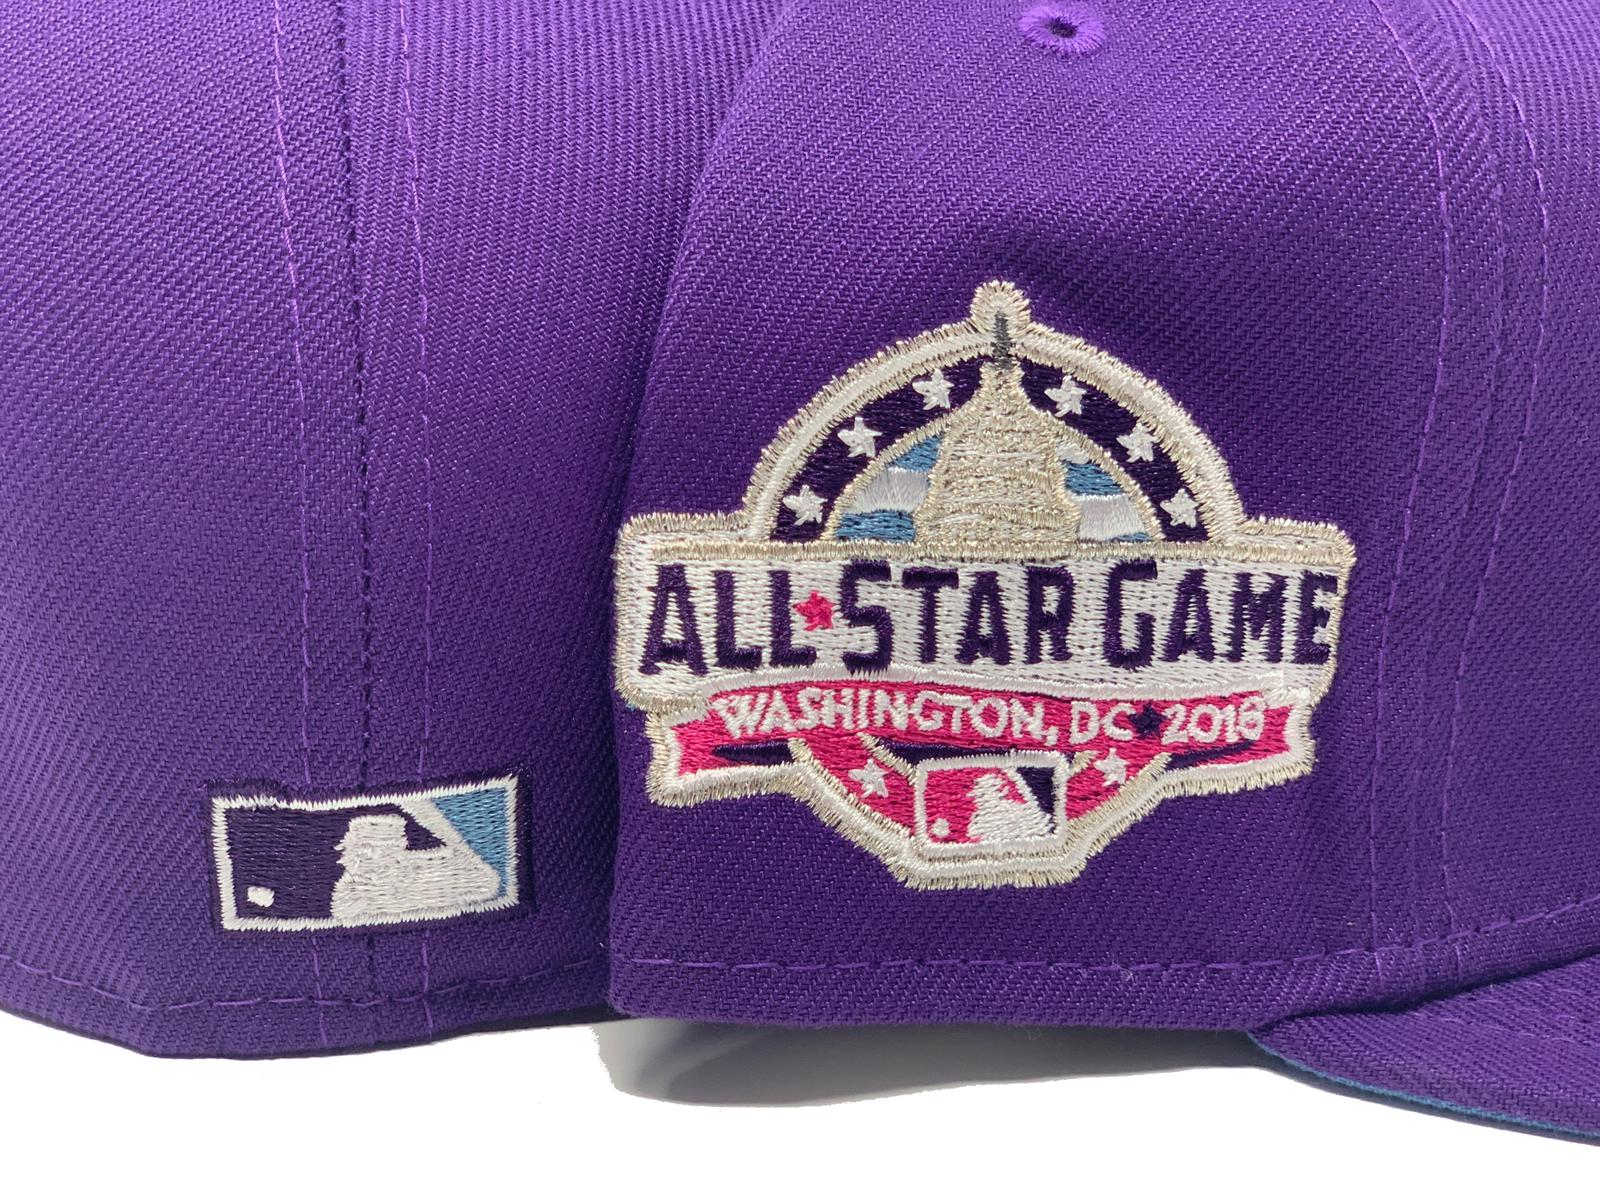 MLB reveals gear for 2018 All-Star Game at Washington, D.C.'s Nationals  Park  - Federal Baseball